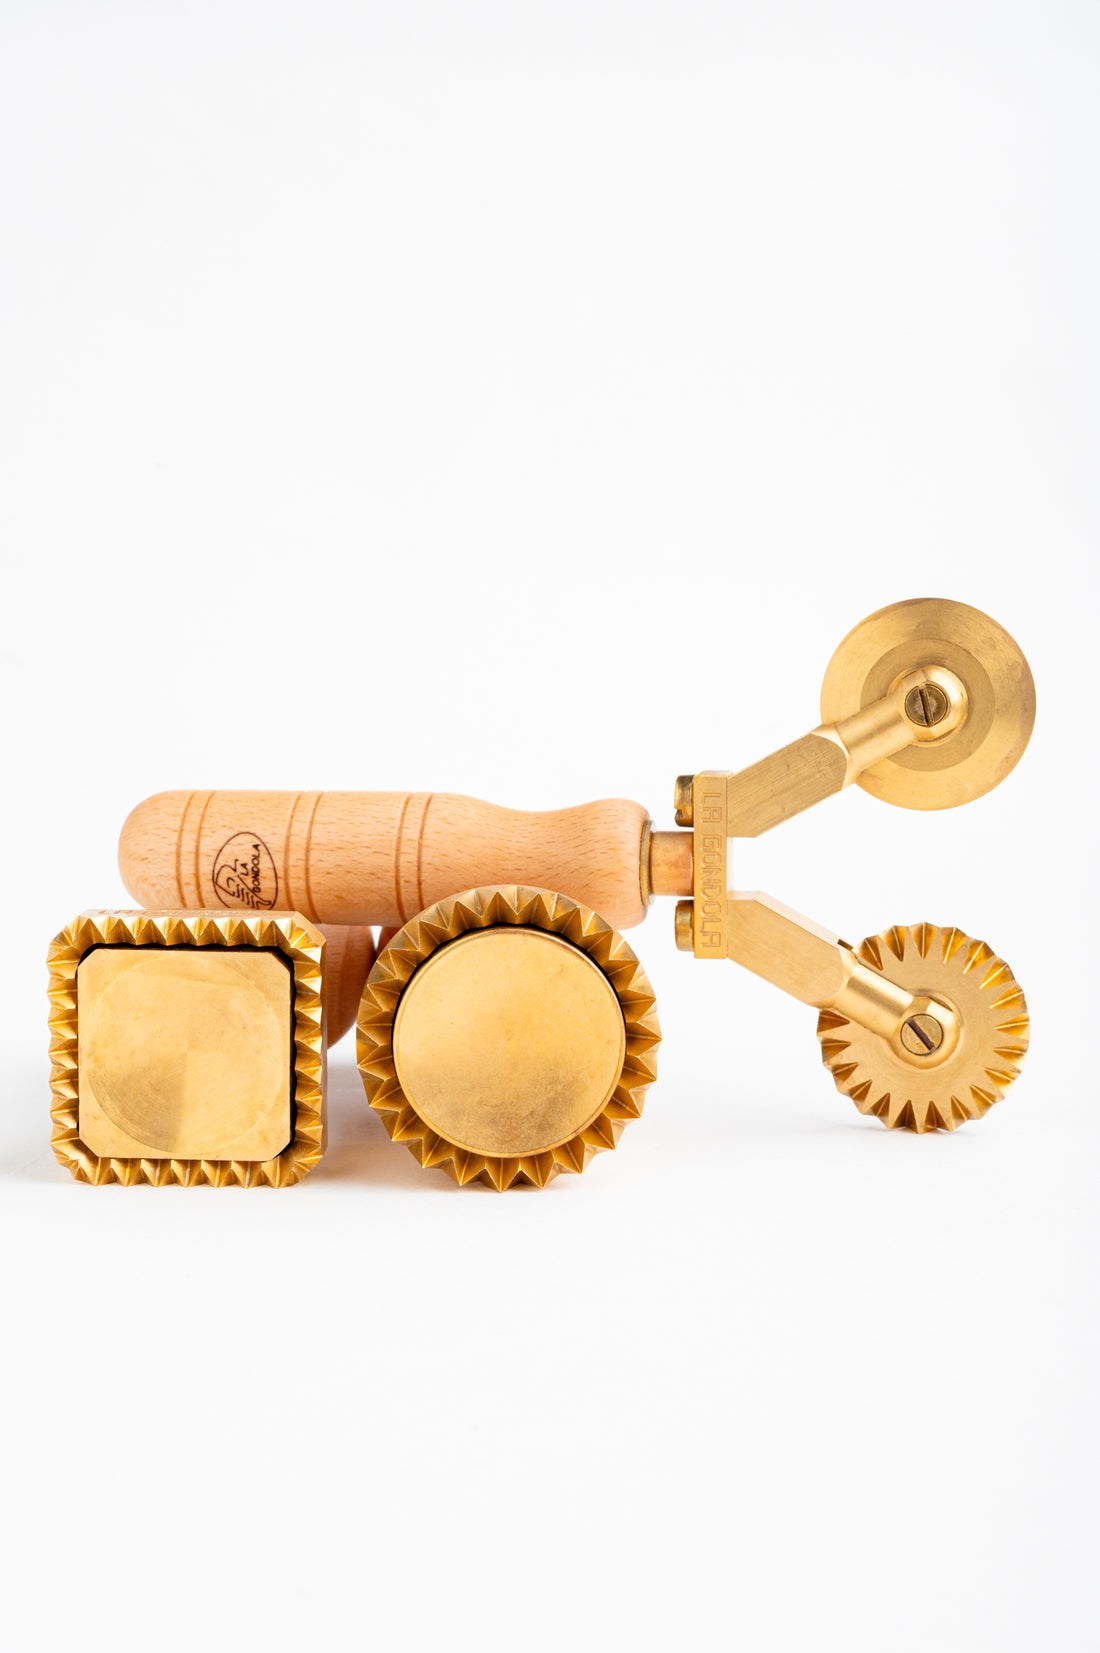 LaGondola Bundle : 1 Square Ravioli Stamp 45x45, 1 Round Tortelli Stamp 50 mm and 1 Double Combined Pasta Cutter Festooned in Brass and Natural Wood - ROSA